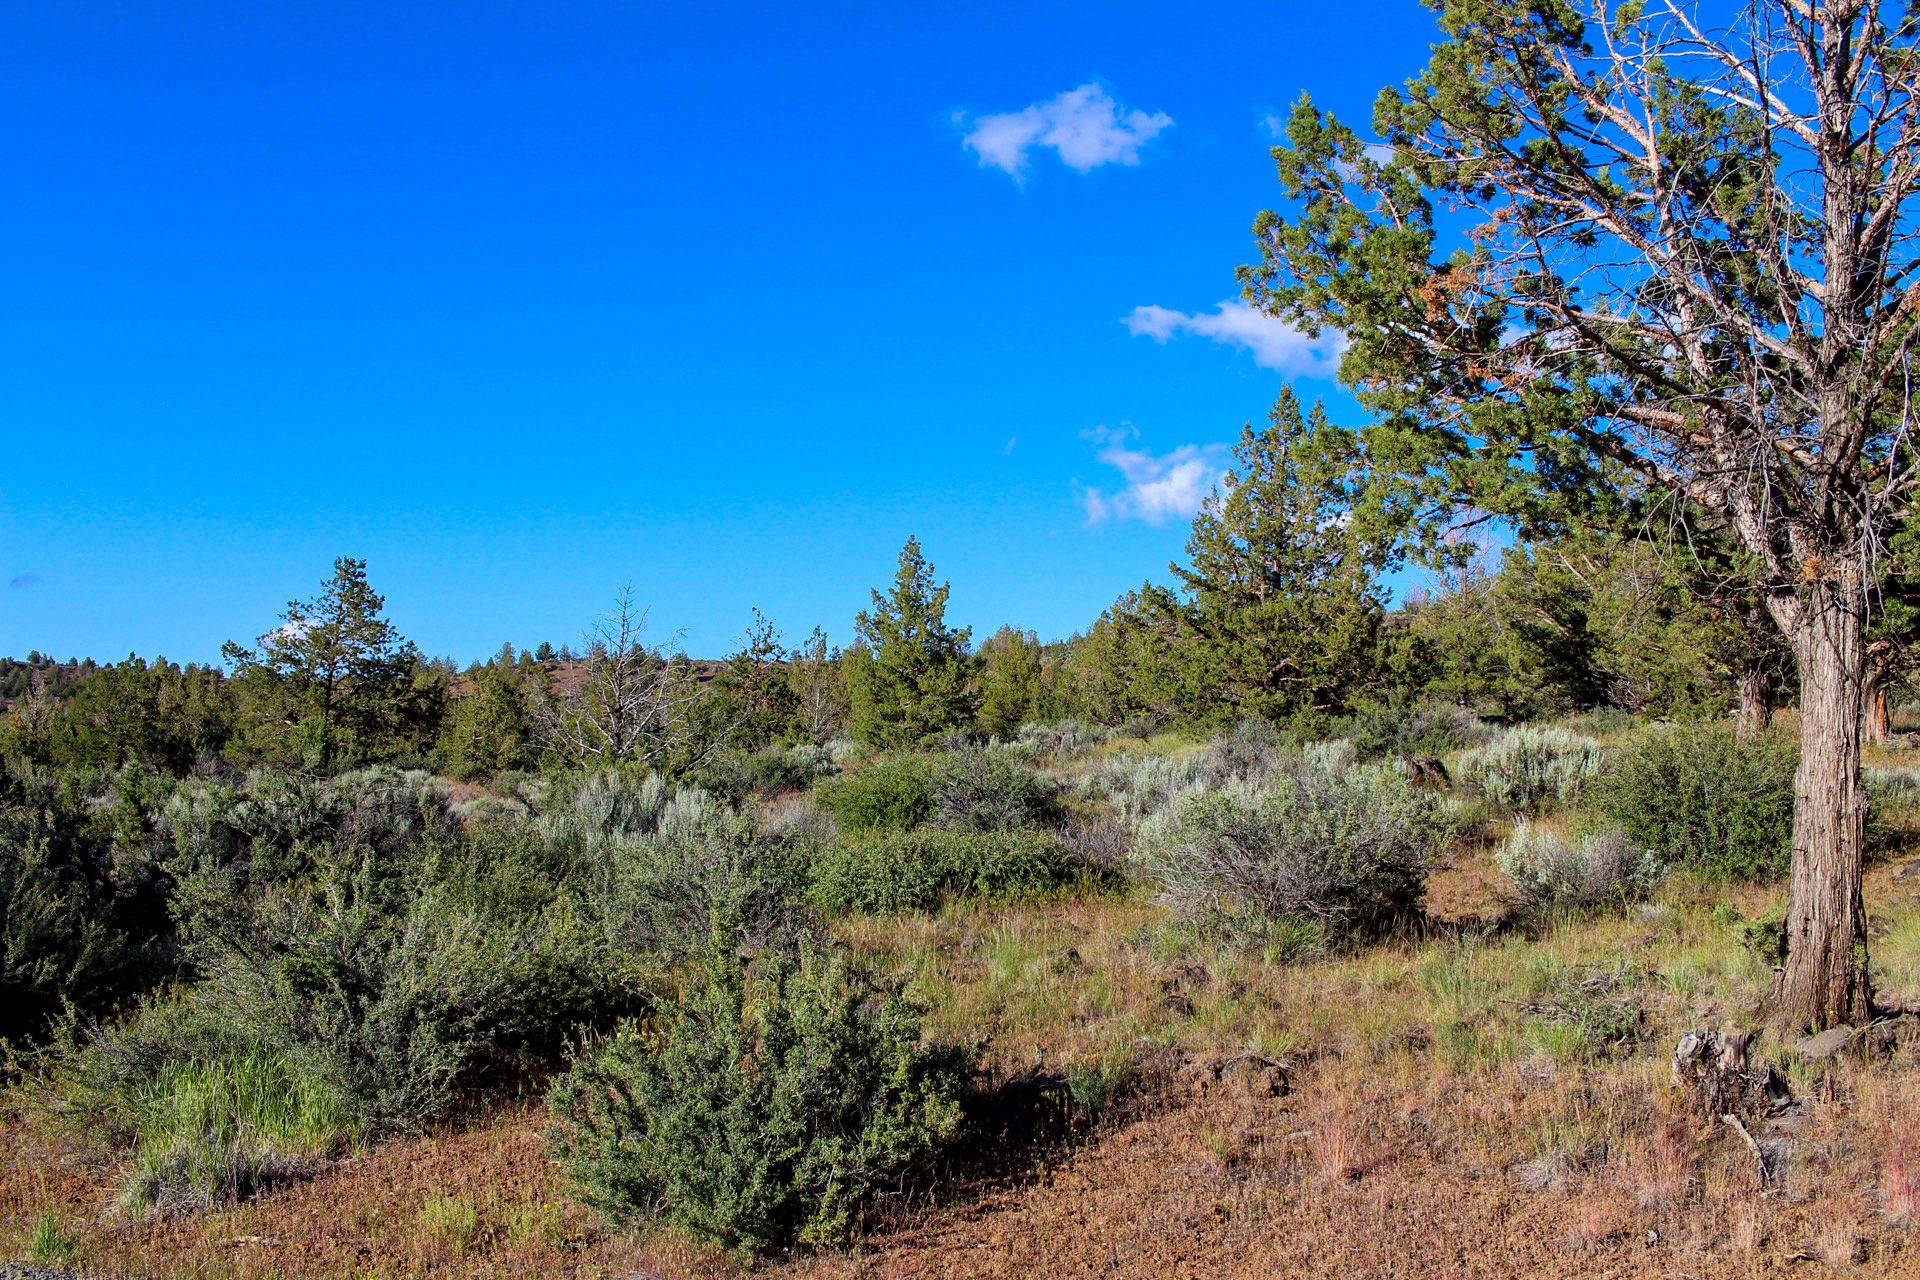 Camp or Build Your Getaway in Peaceful & Uncrowded California Pines, Modoc County, California! - Image 11 of 11